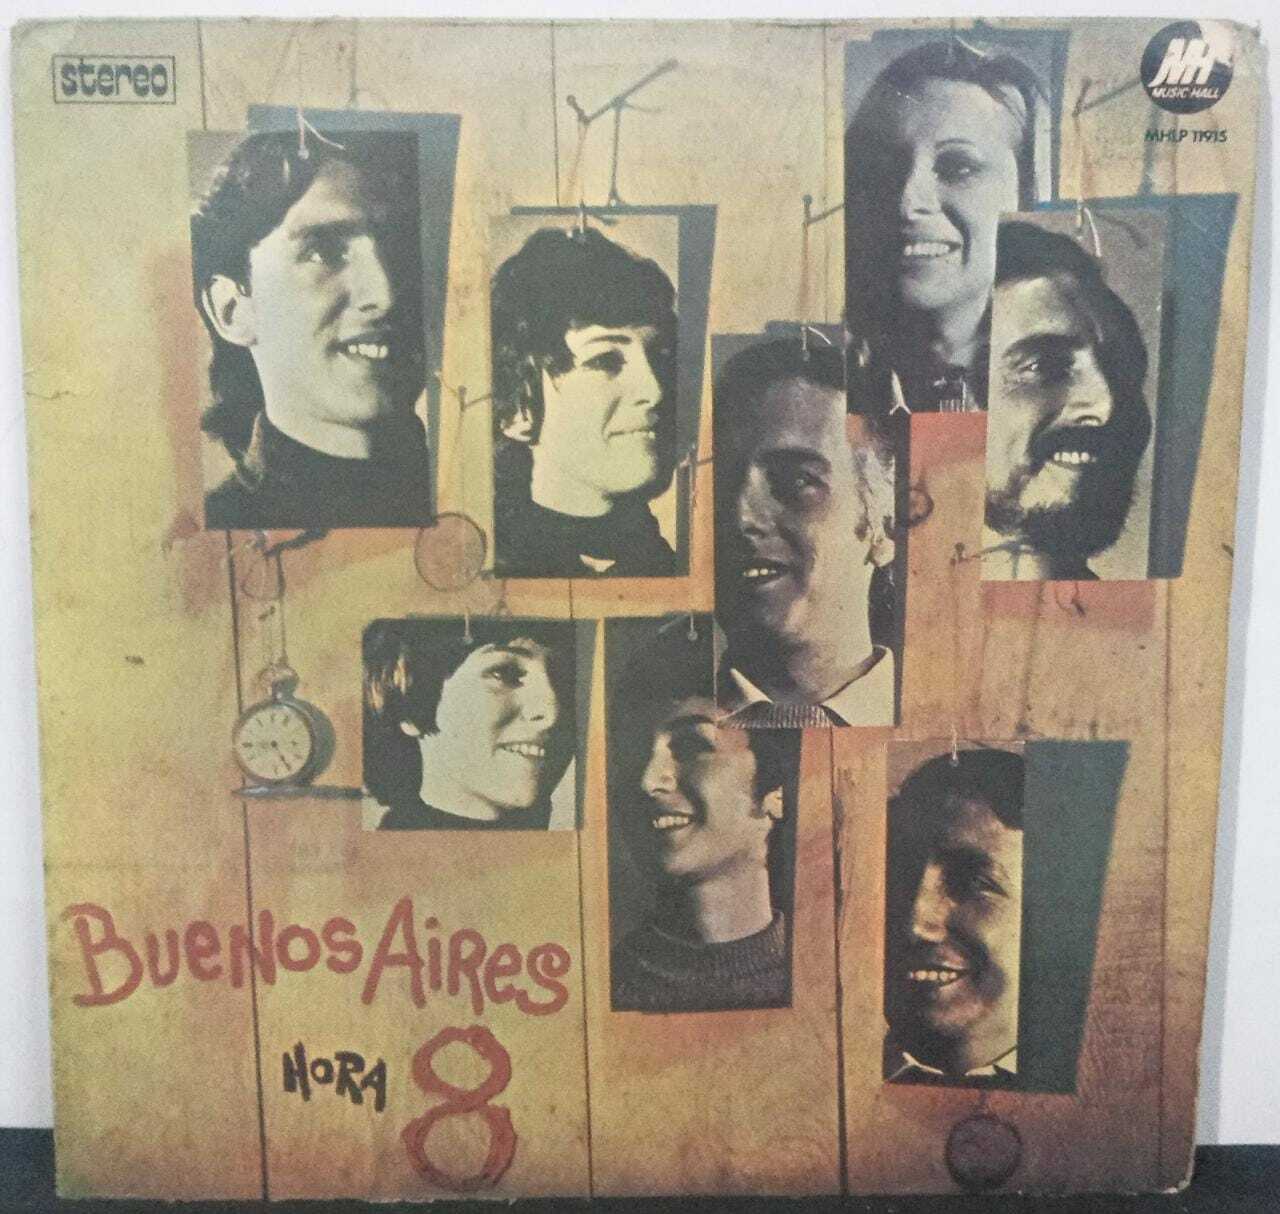 Vinil - Buenos Aires 8 - Buenos Aires Hora 8